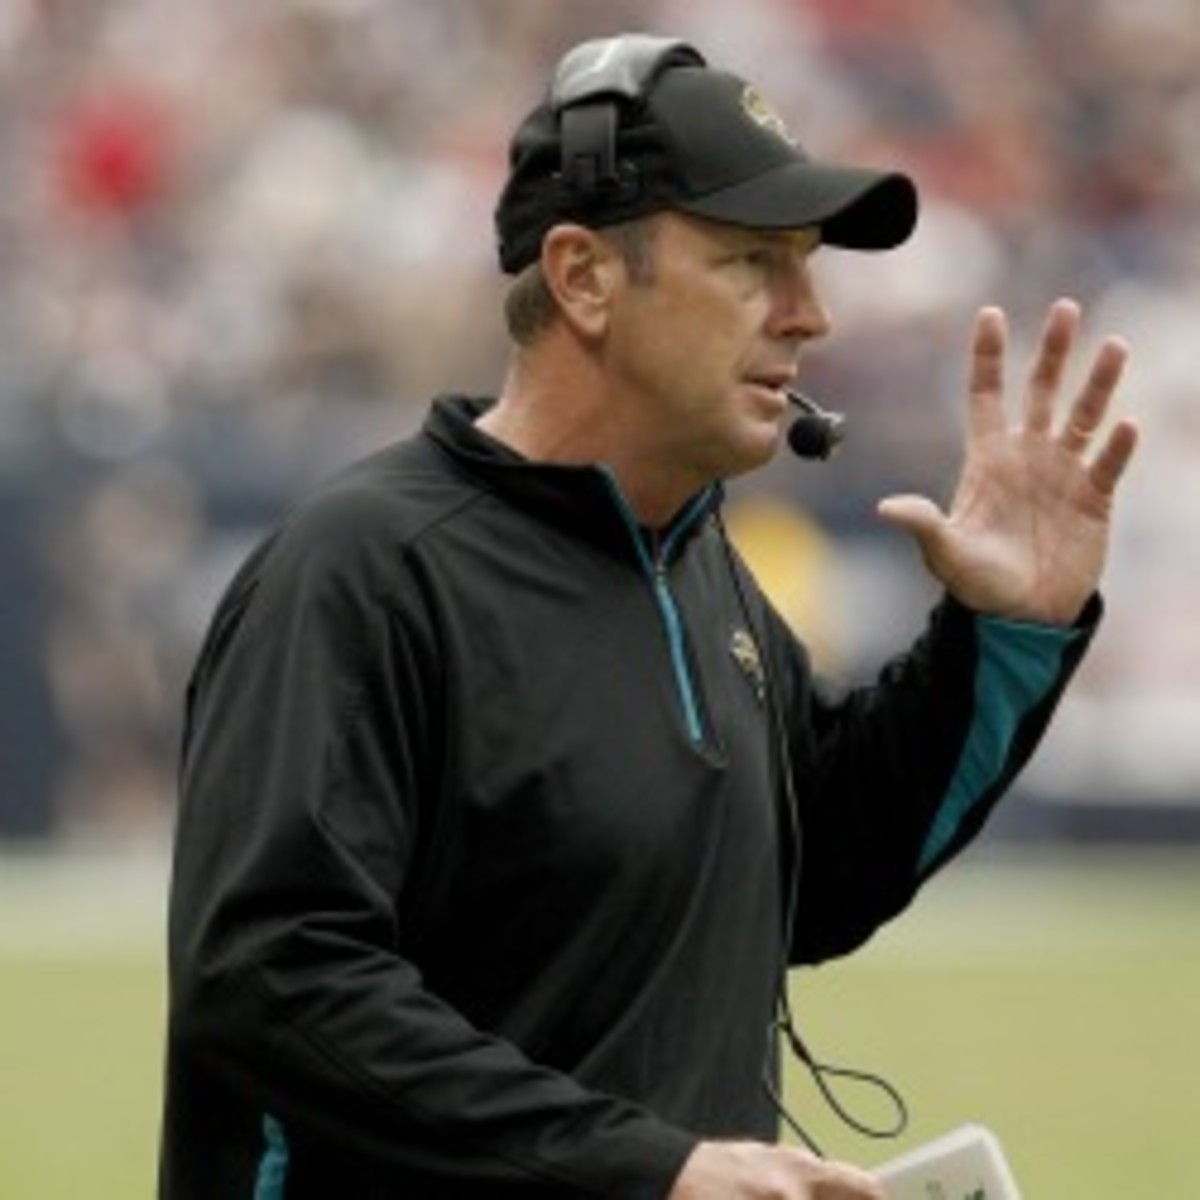 Jaguars coach Mike Mularkey's job status is in jeopardy after going 2-14 in his first season with the team. Thomas B. Shea/Getty Images)